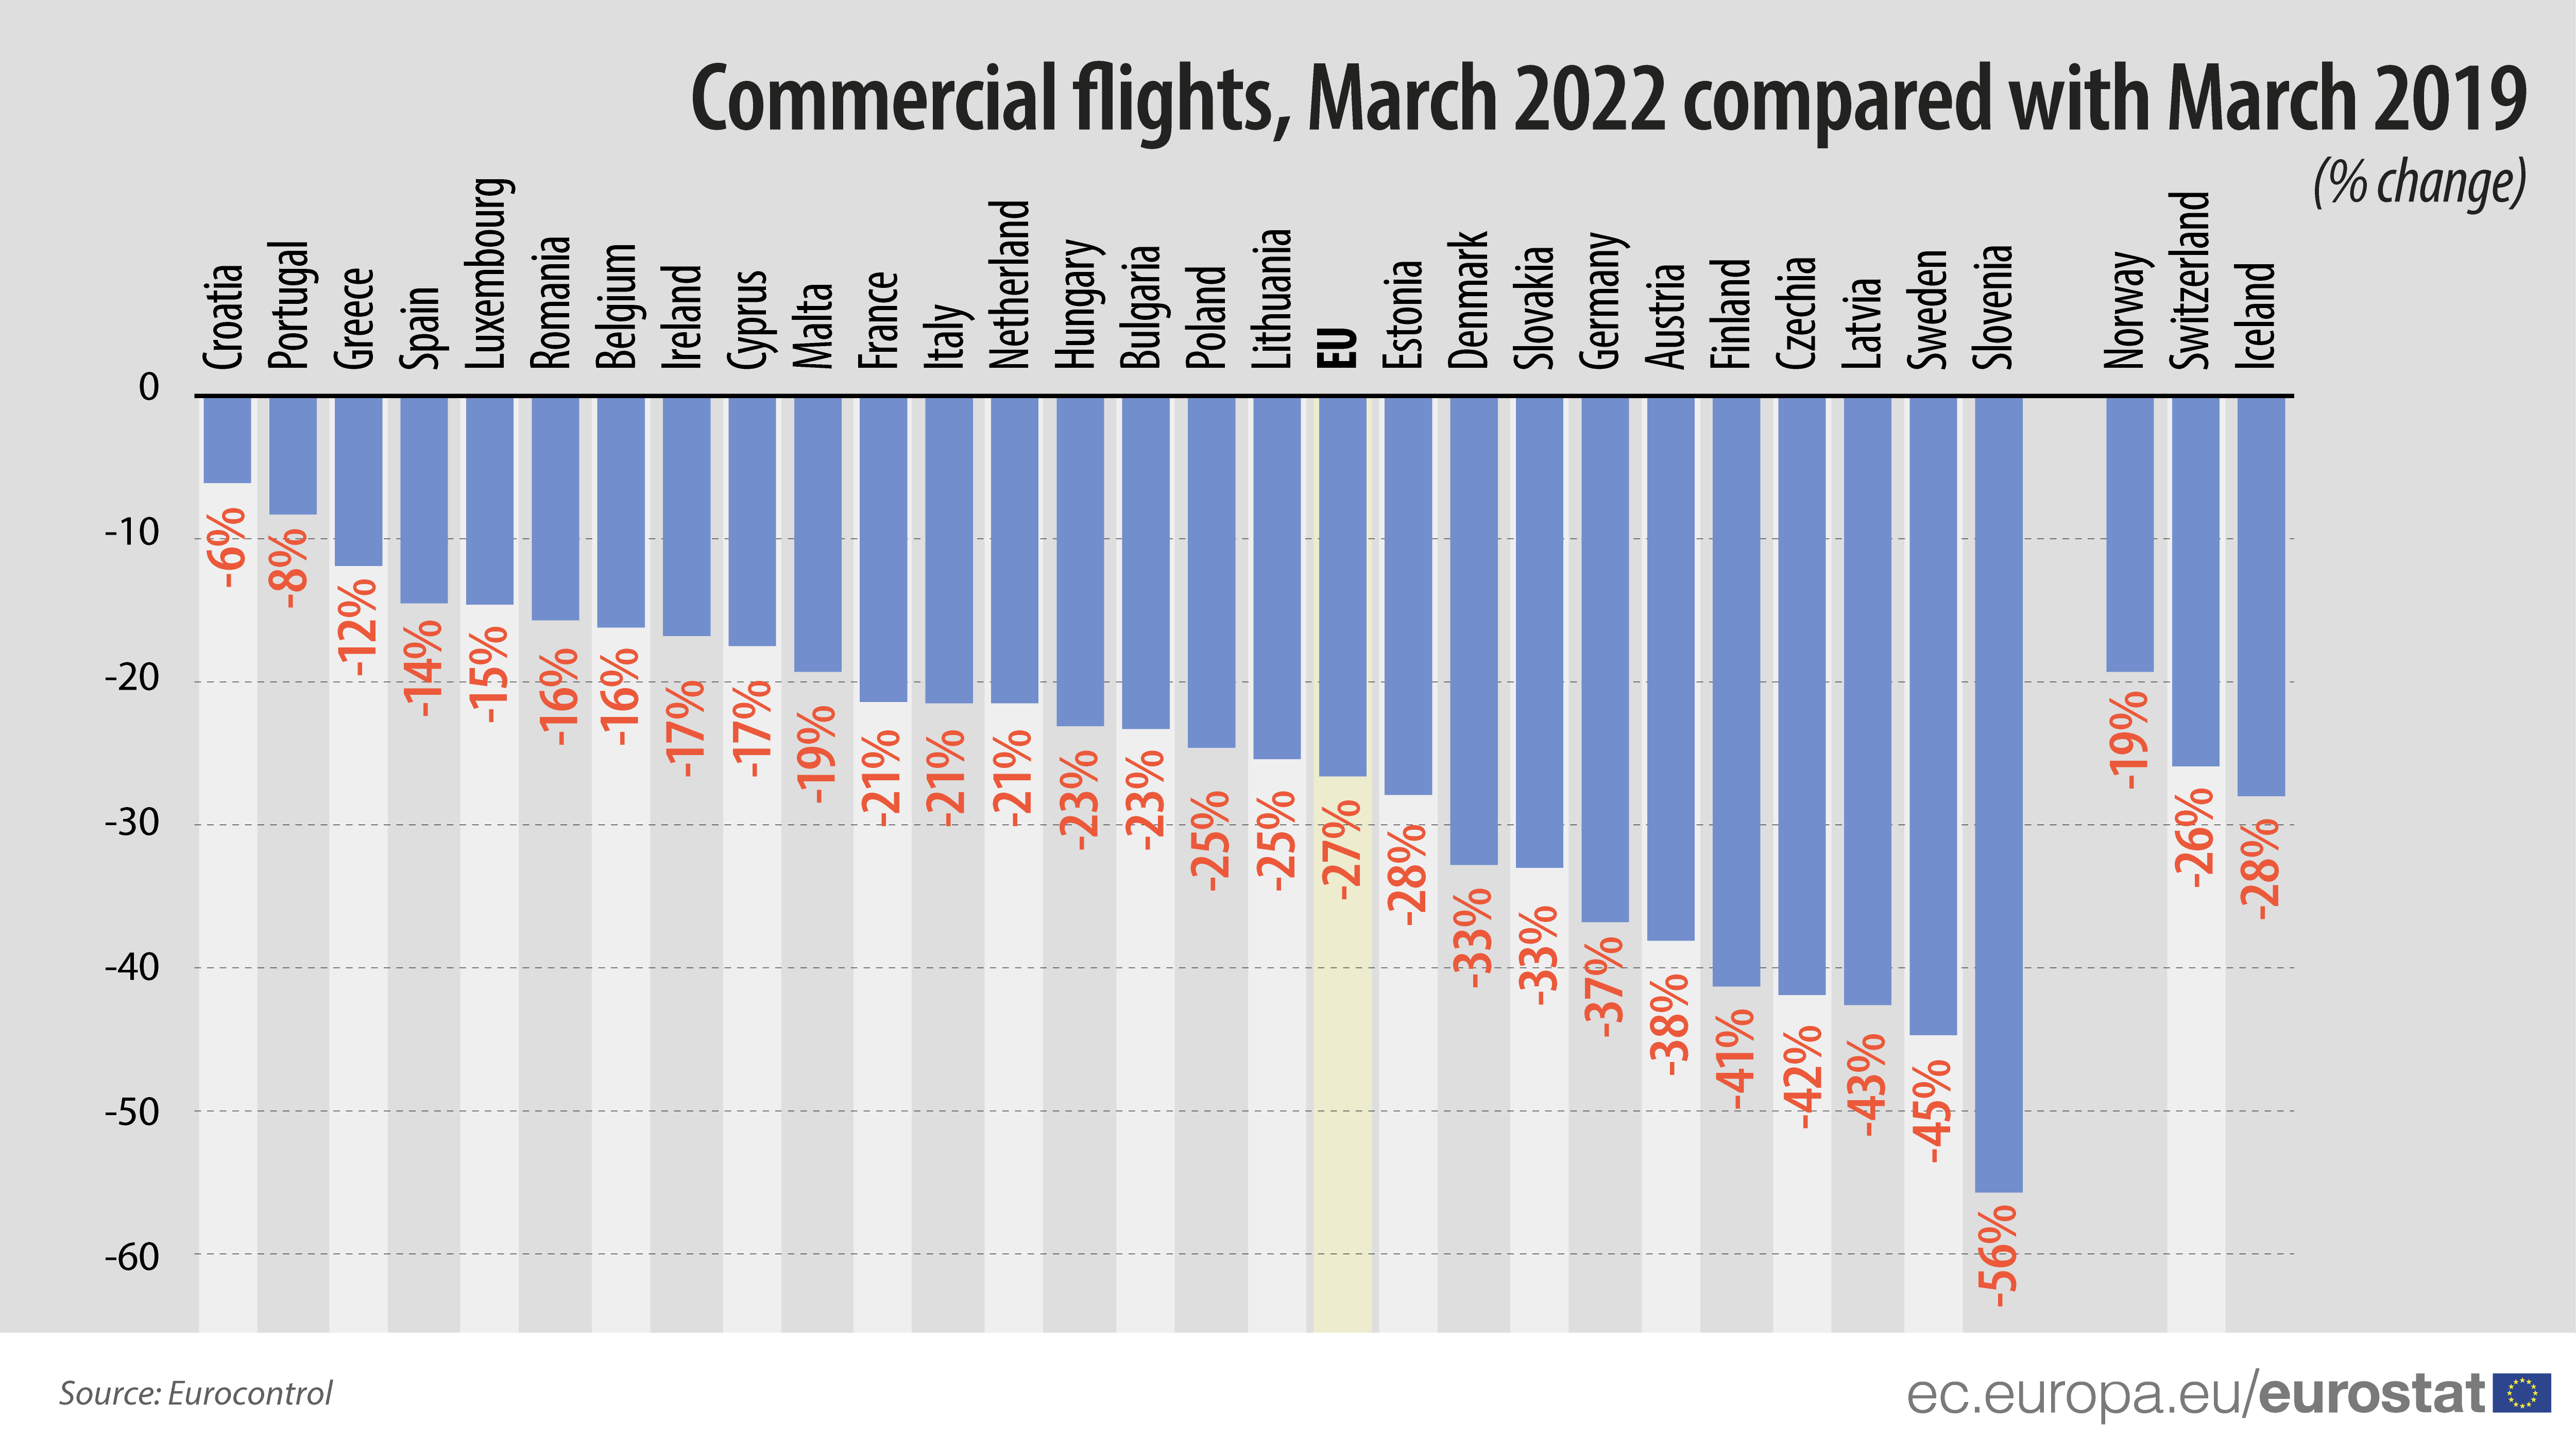 Bar chart: Commercial flights, March 2022 compared with March 2019 (% change)